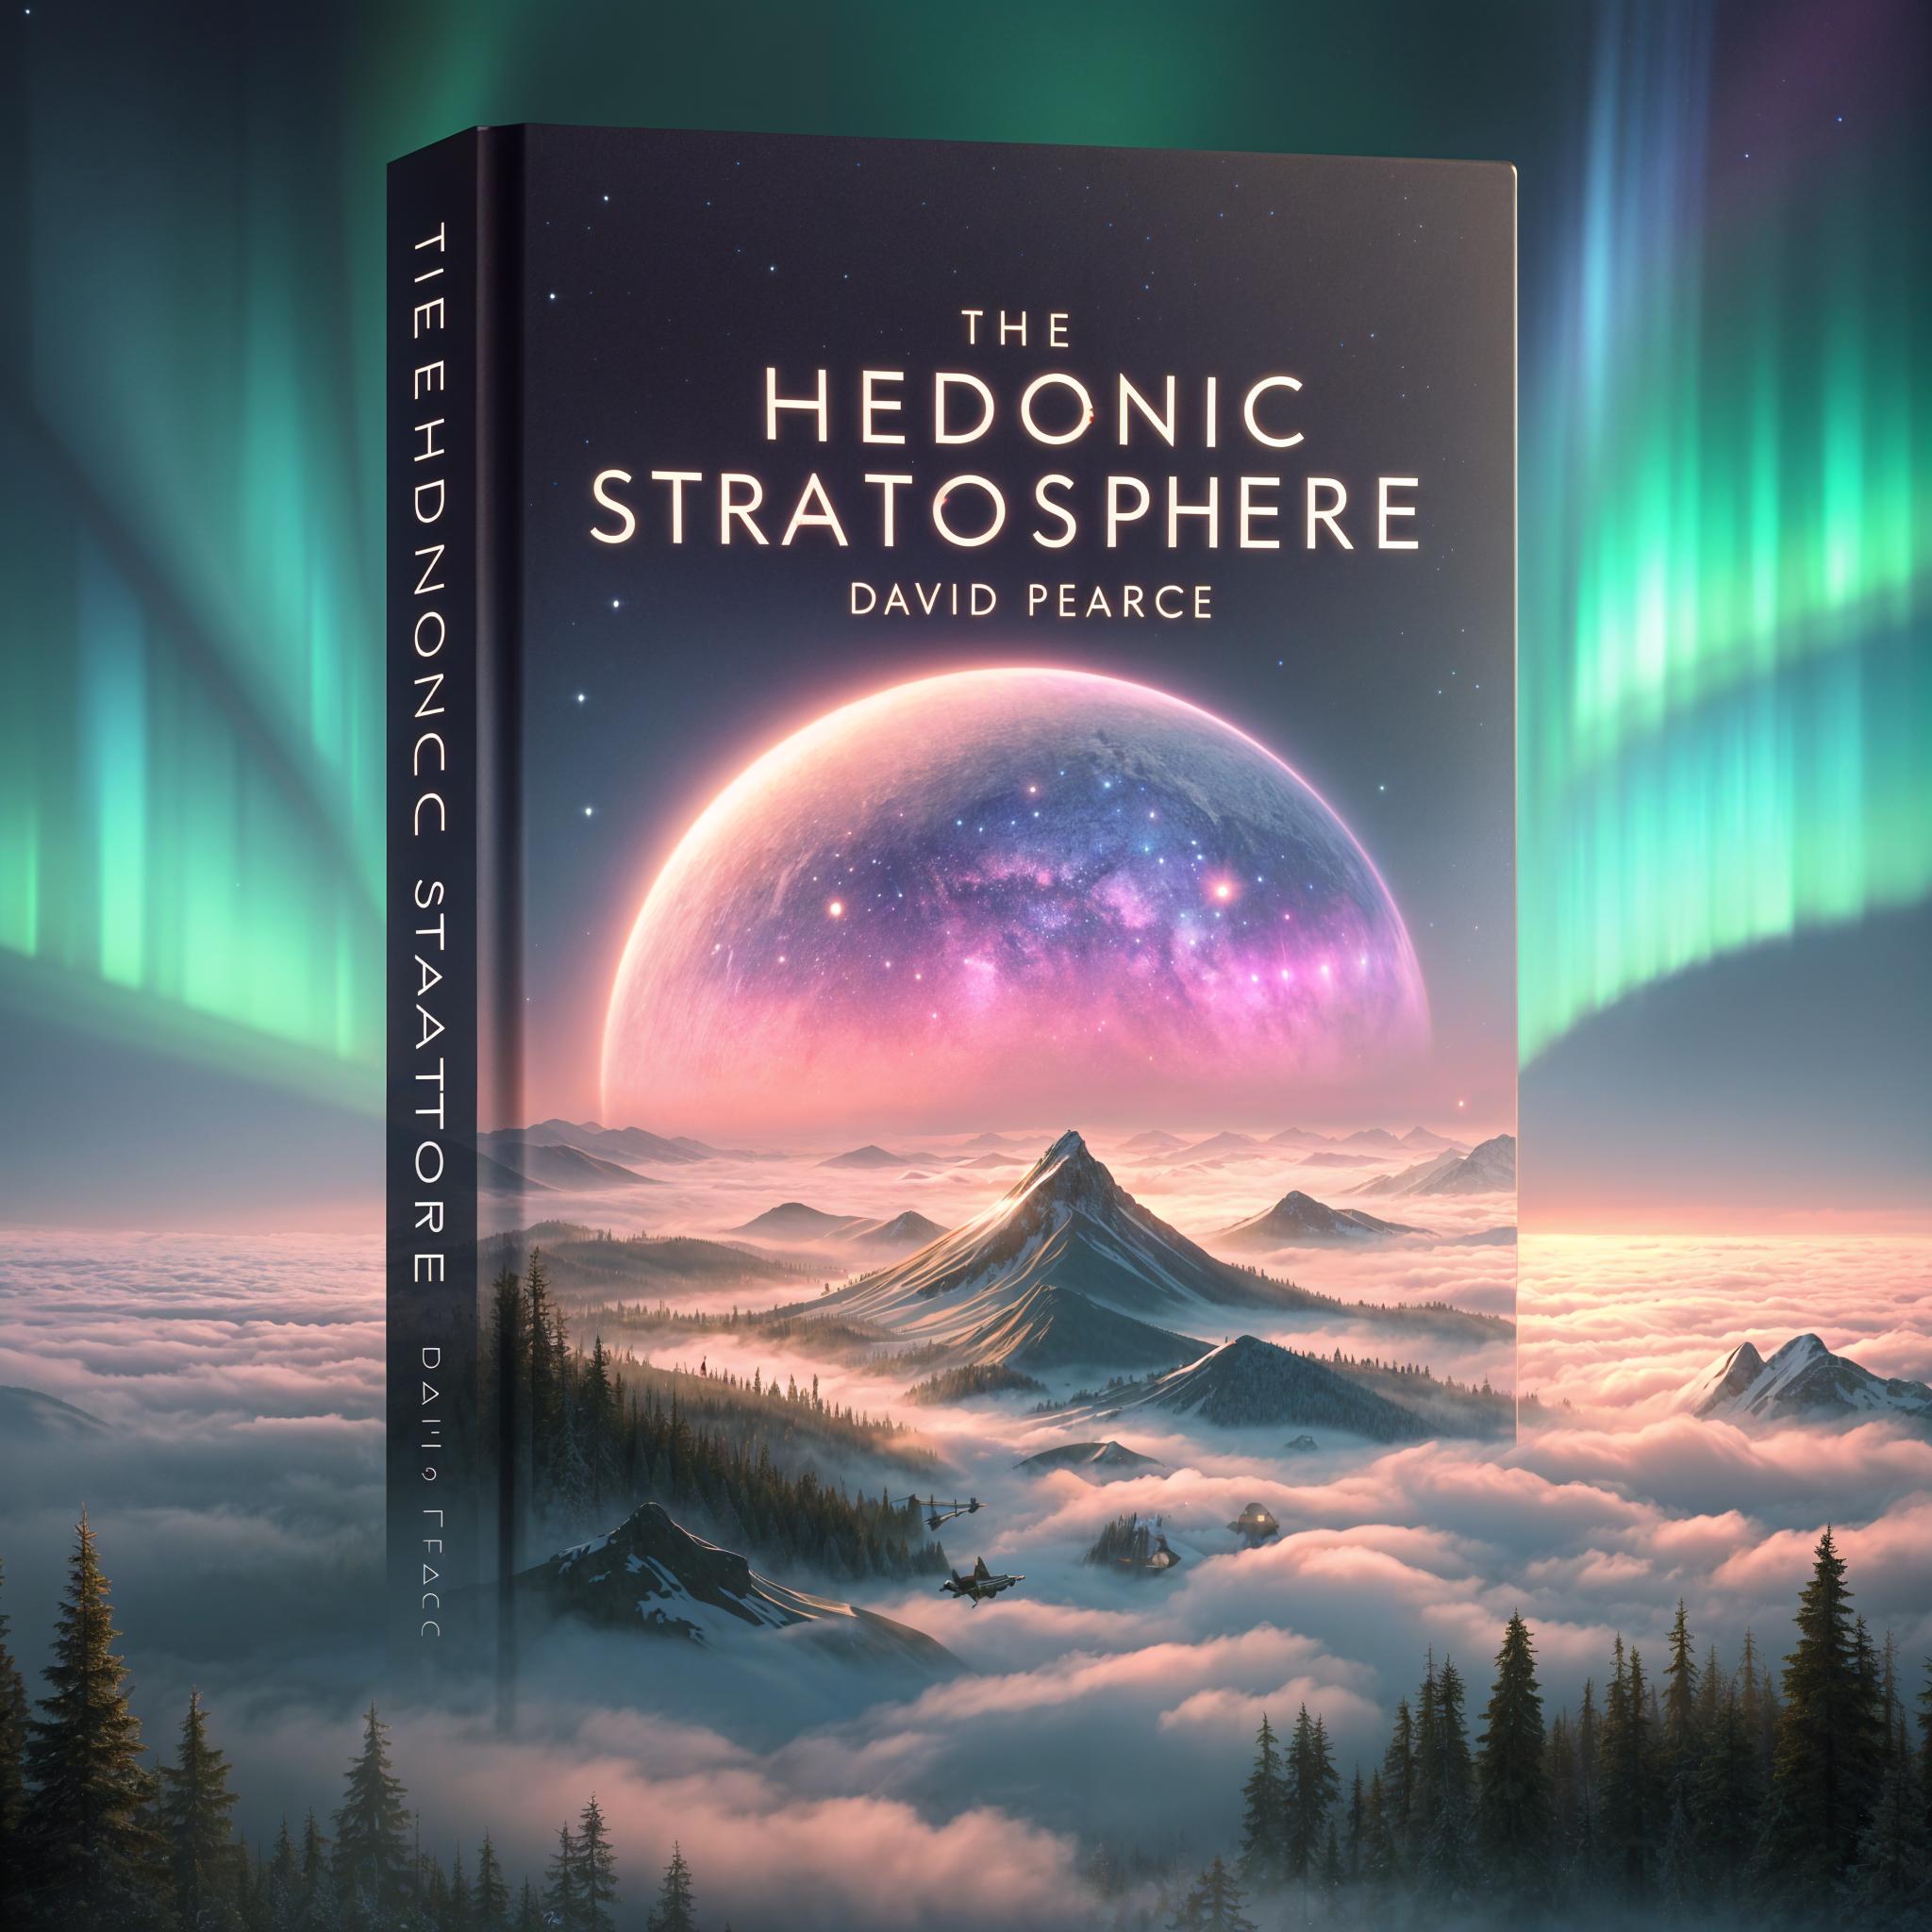 The Hedonic Stratosphere by David Pearce